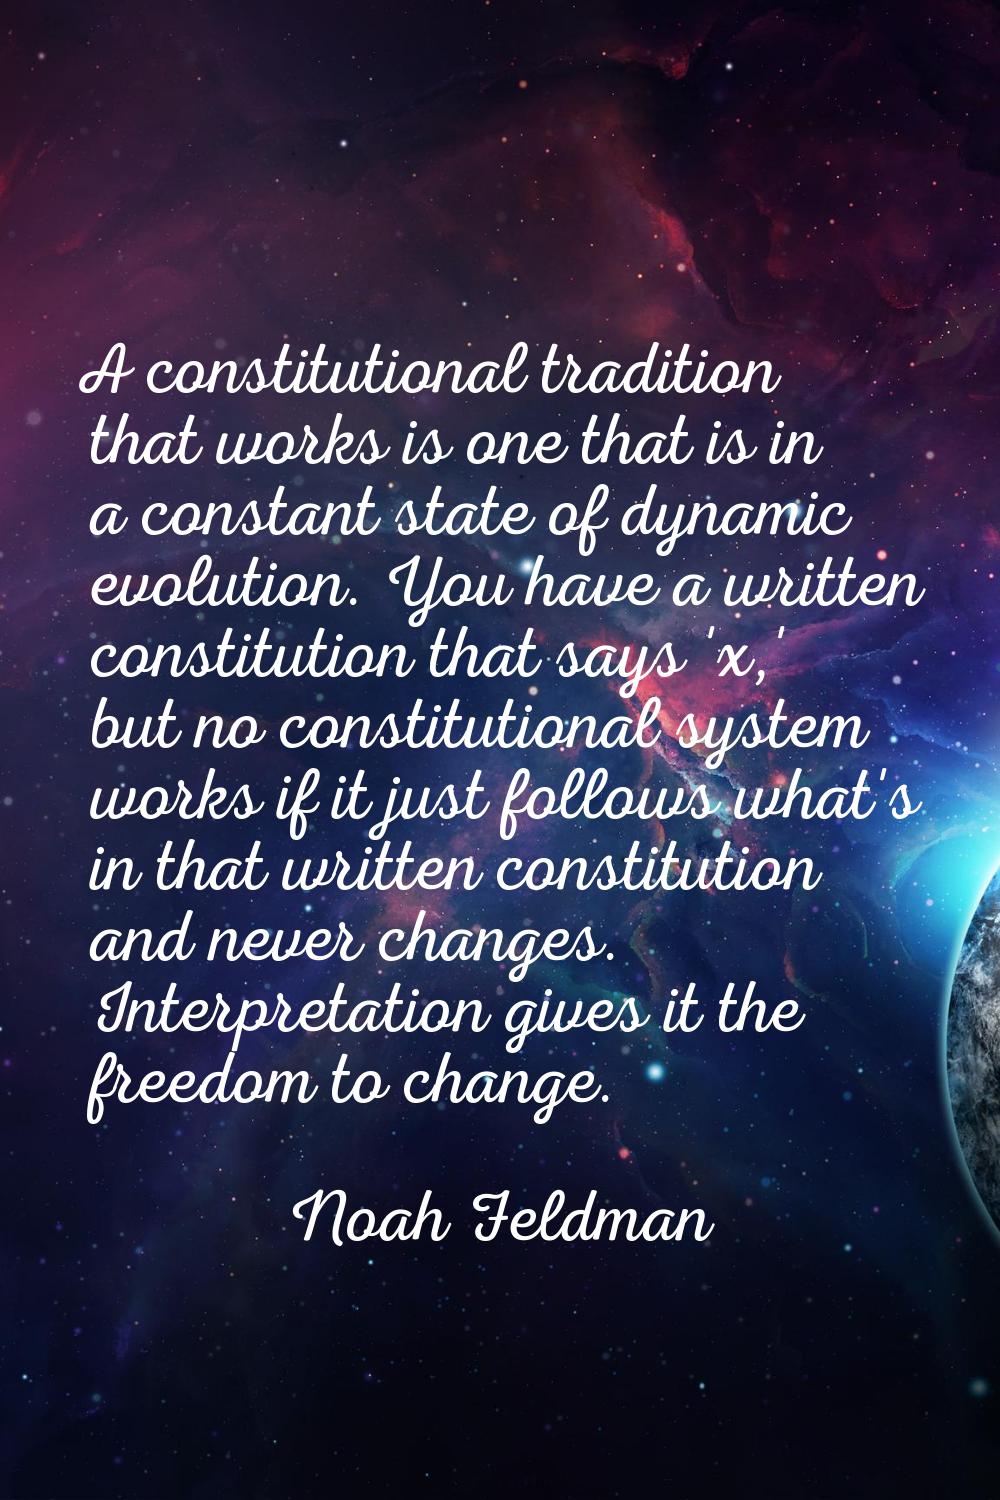 A constitutional tradition that works is one that is in a constant state of dynamic evolution. You 